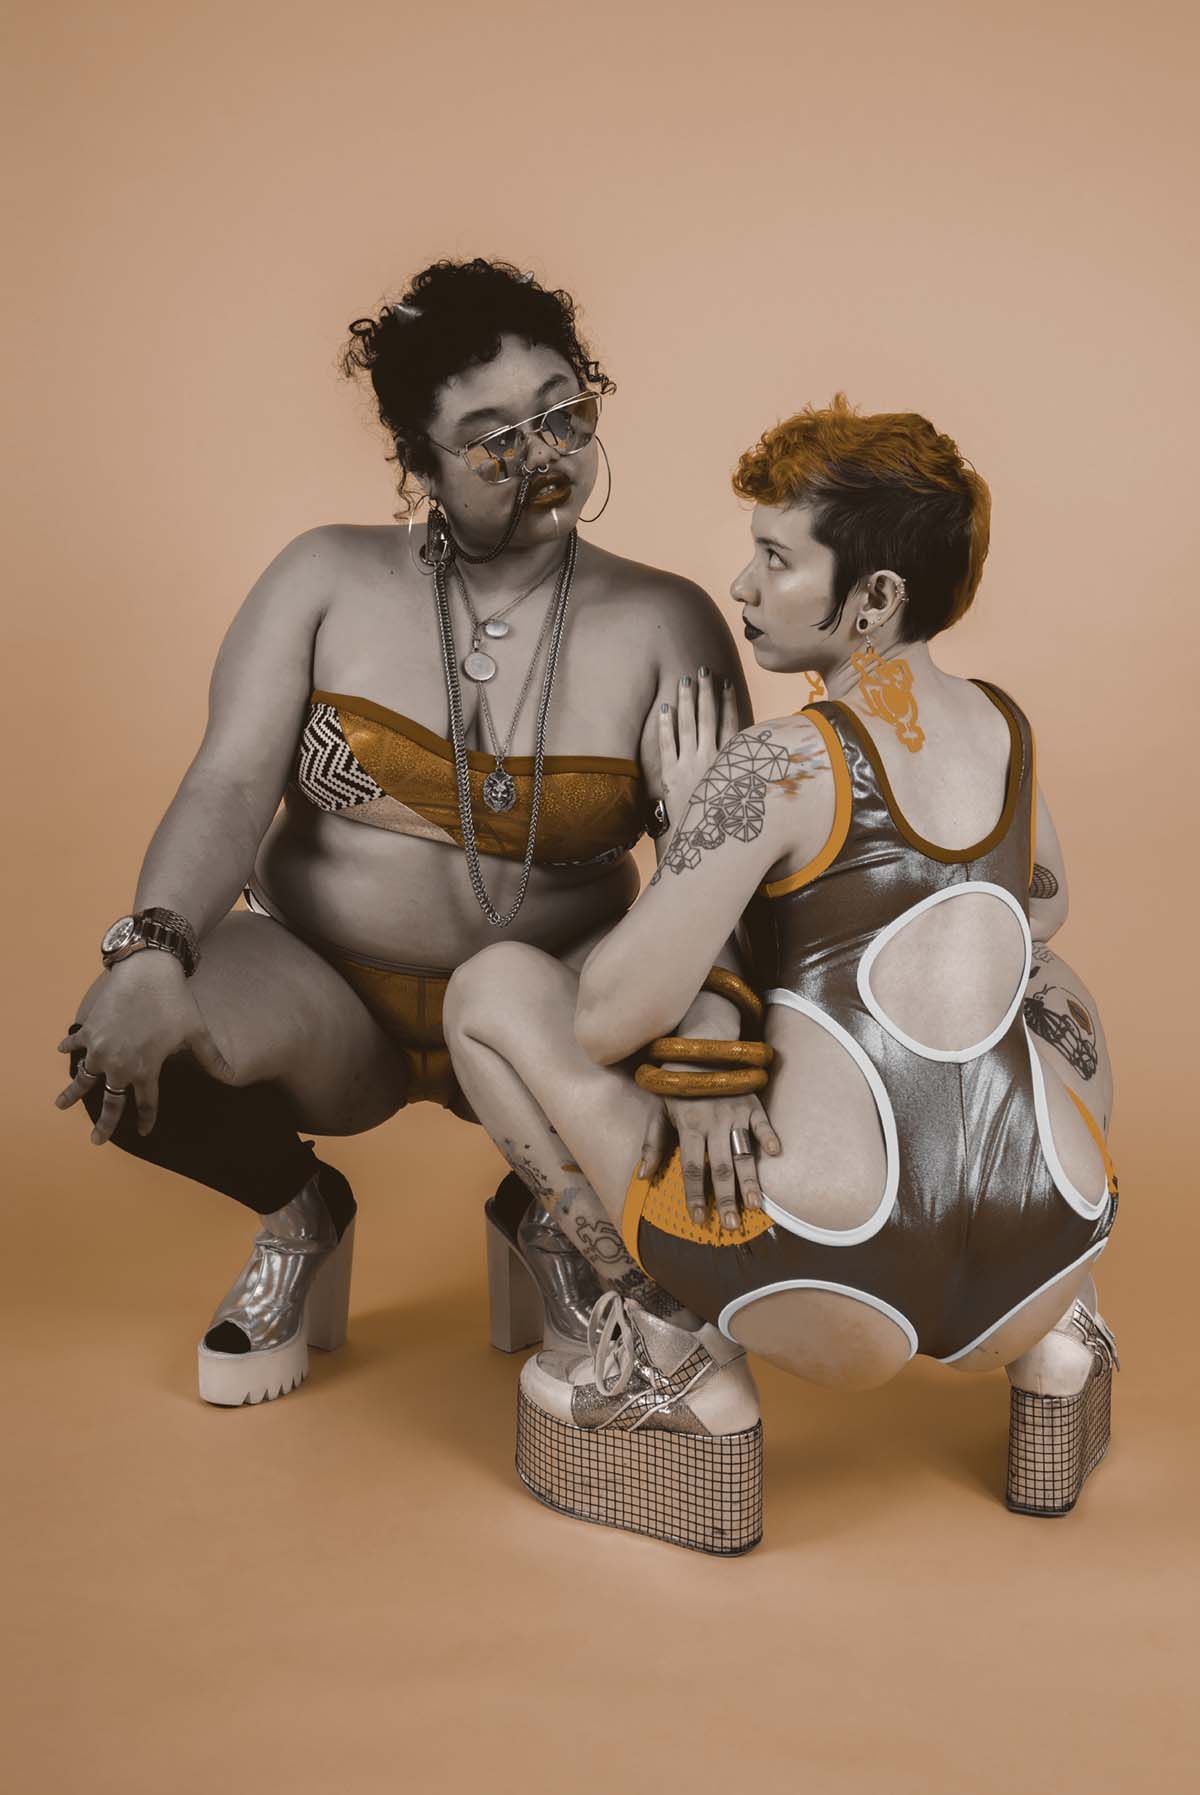 Sepia image of two people posing in front of a backdrop wearing spandex clothing by Rebirth Garments